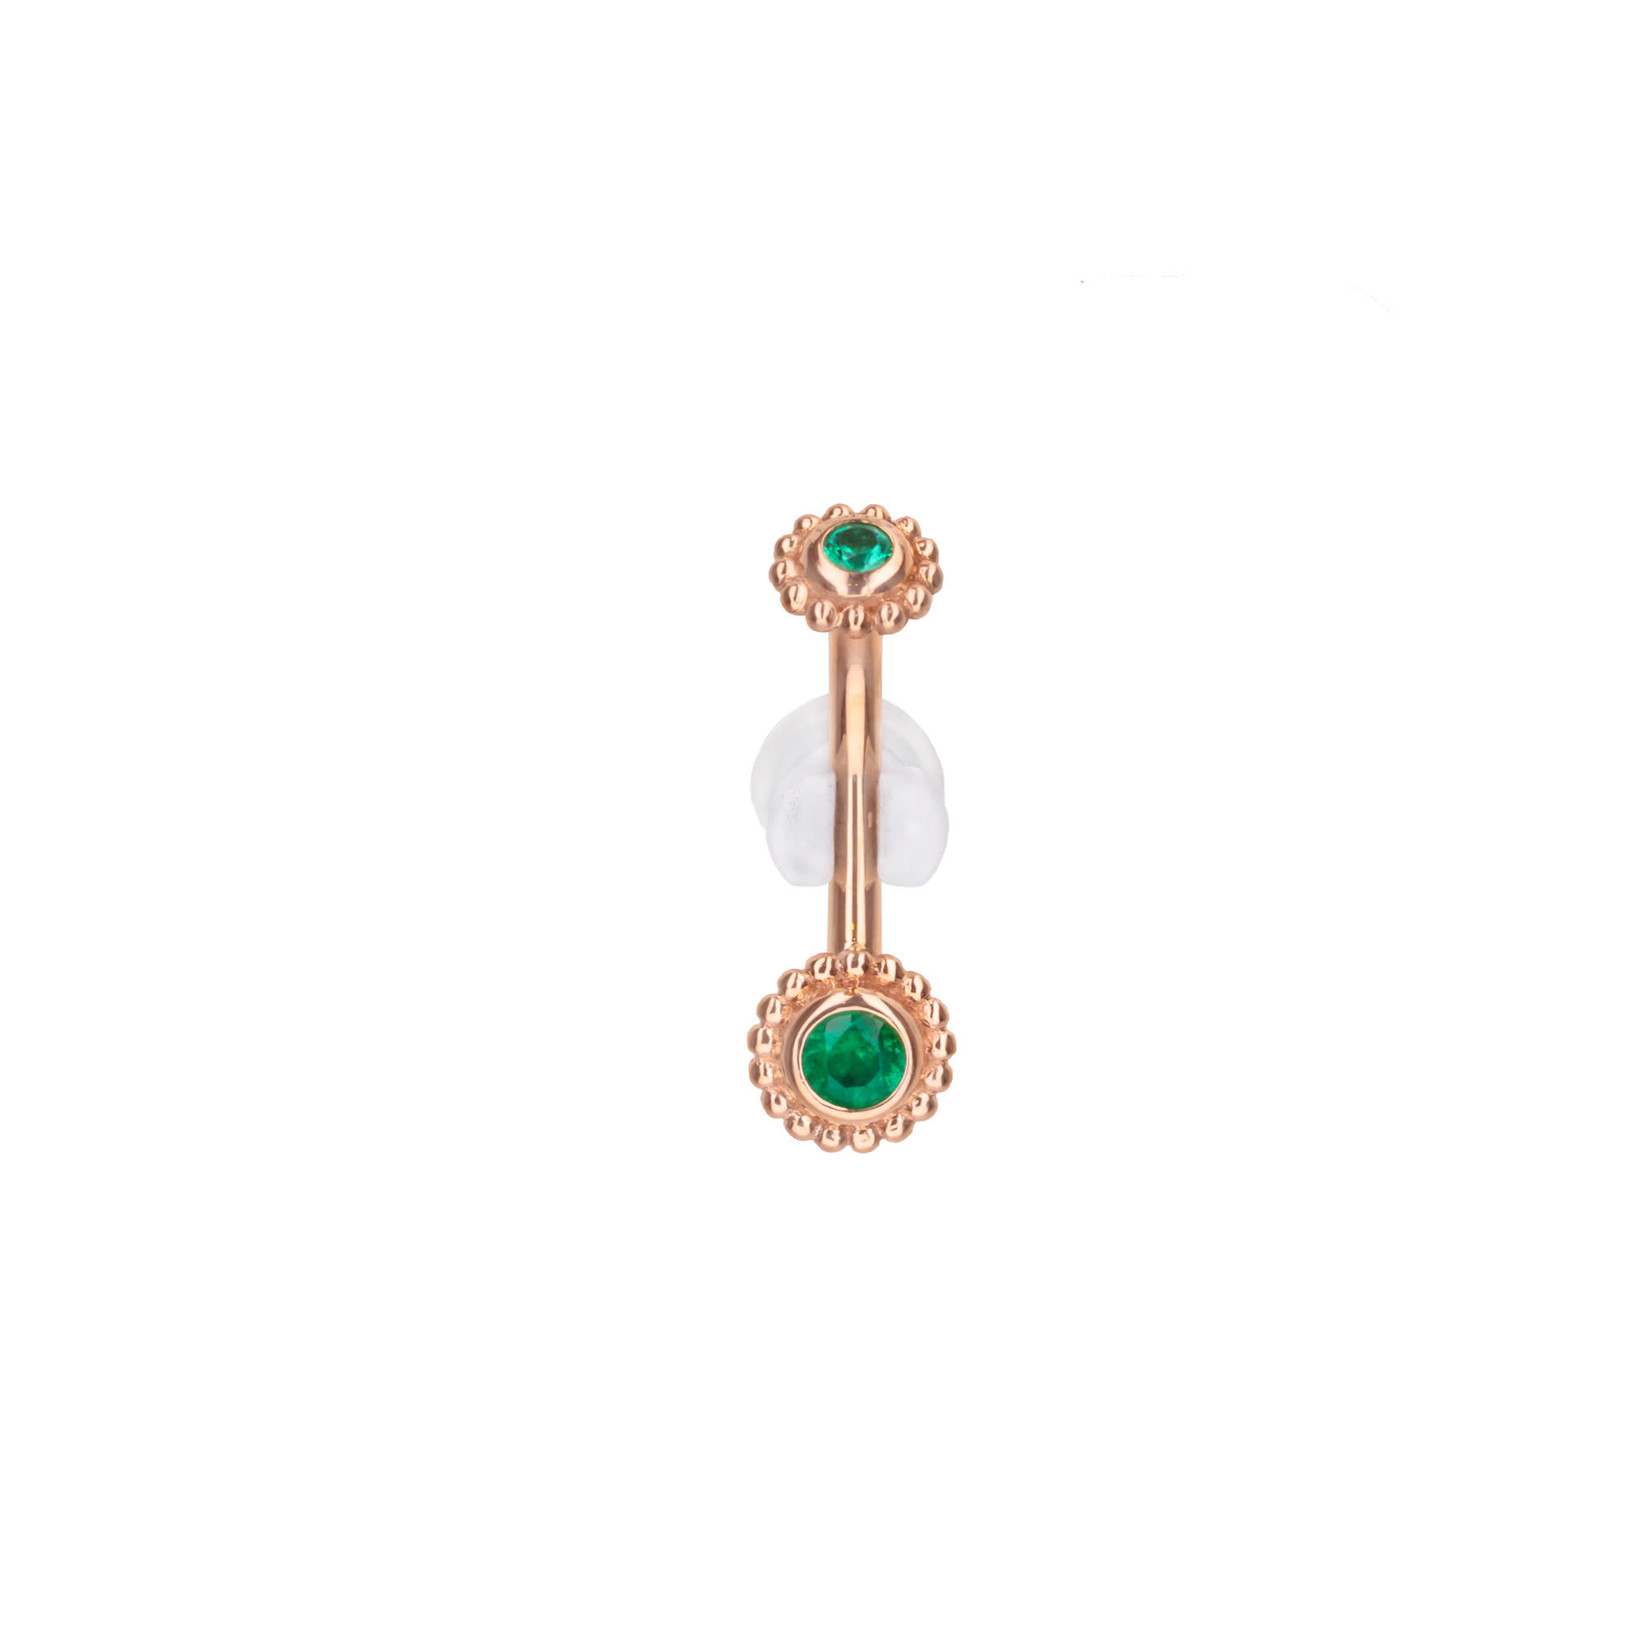 BVLA 14g 3/8 BVLA rose gold "Beaded Choctaw" navel curve with 2.0 & 3.0 AA emerald